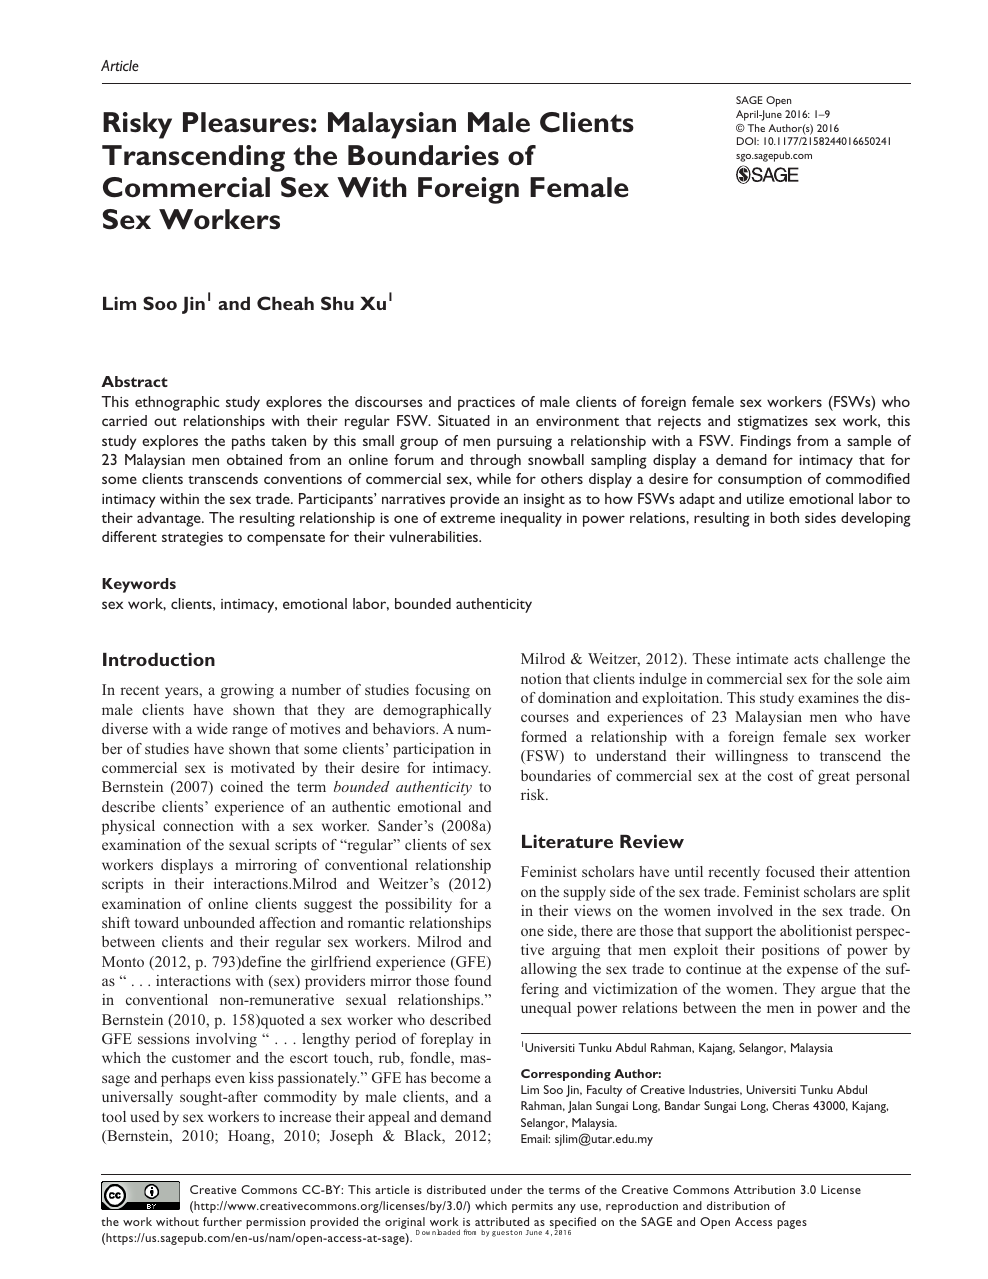 Risky Pleasures Malaysian Male Clients Transcending the Boundaries of Commercial Sex With Foreign Female Sex Workers